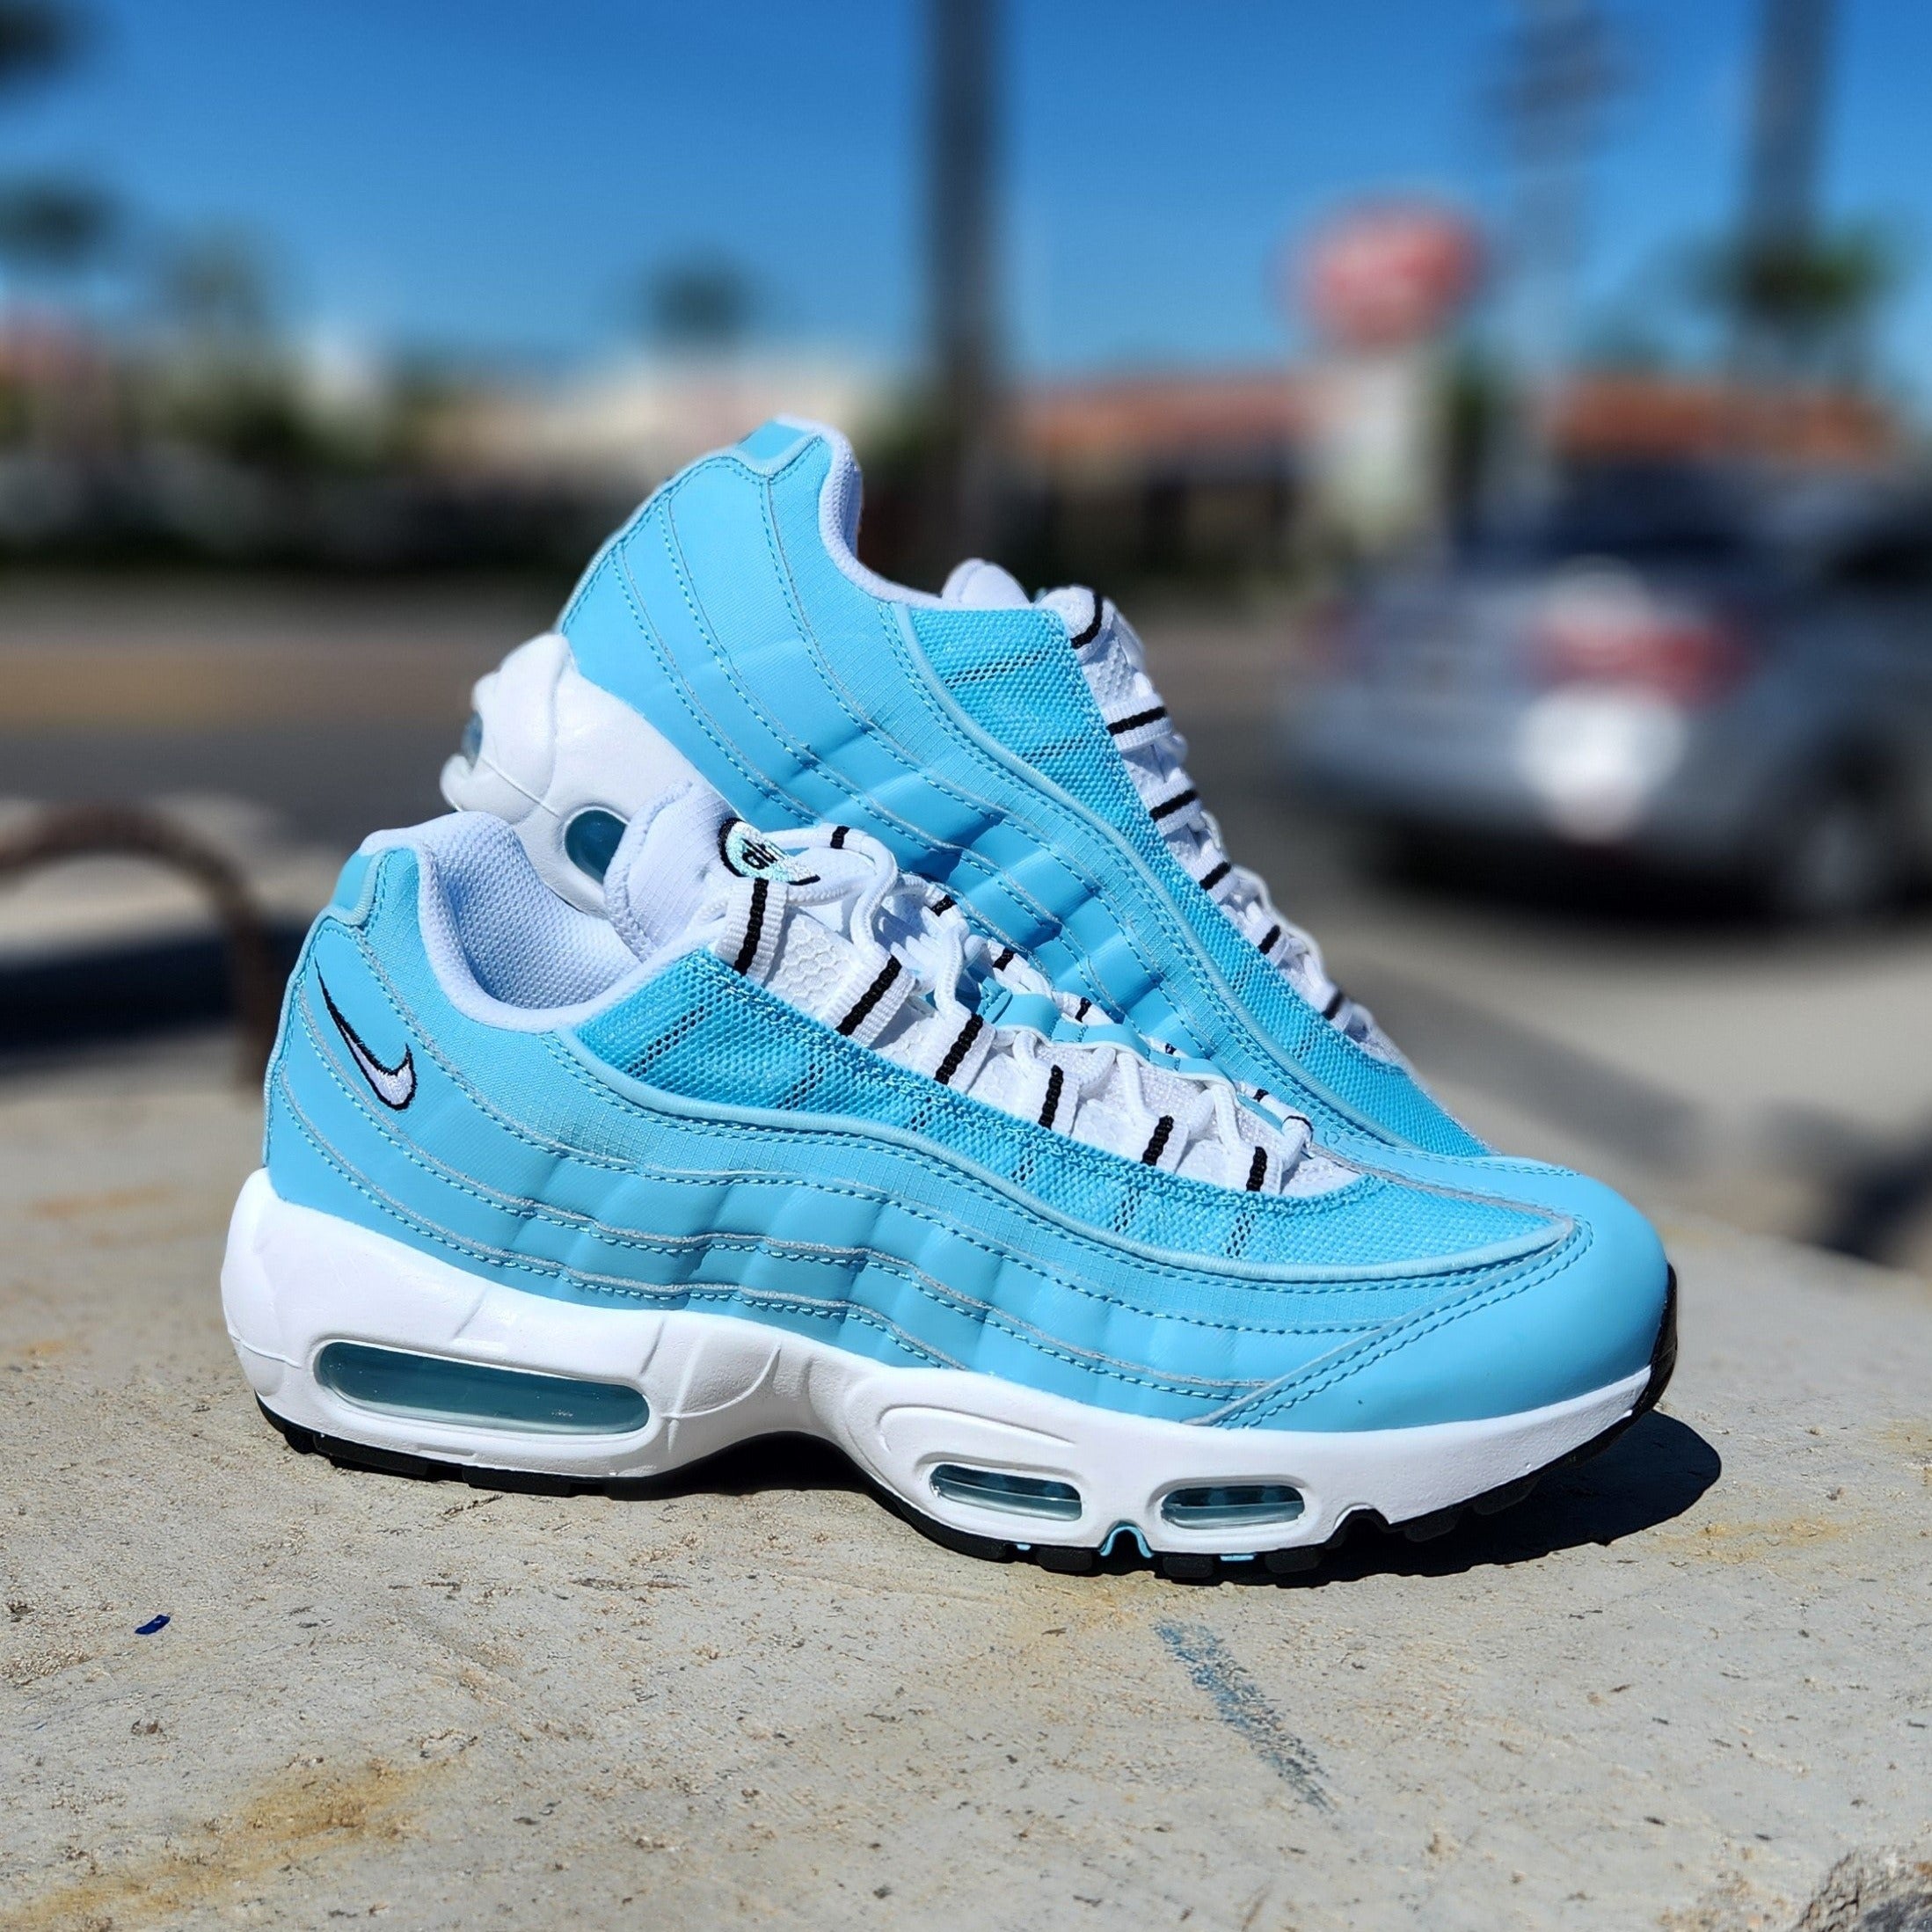 Stewart Island jogger achterlijk persoon Nike Air Max 95 Ice Blue – PRIVATE SNEAKERS